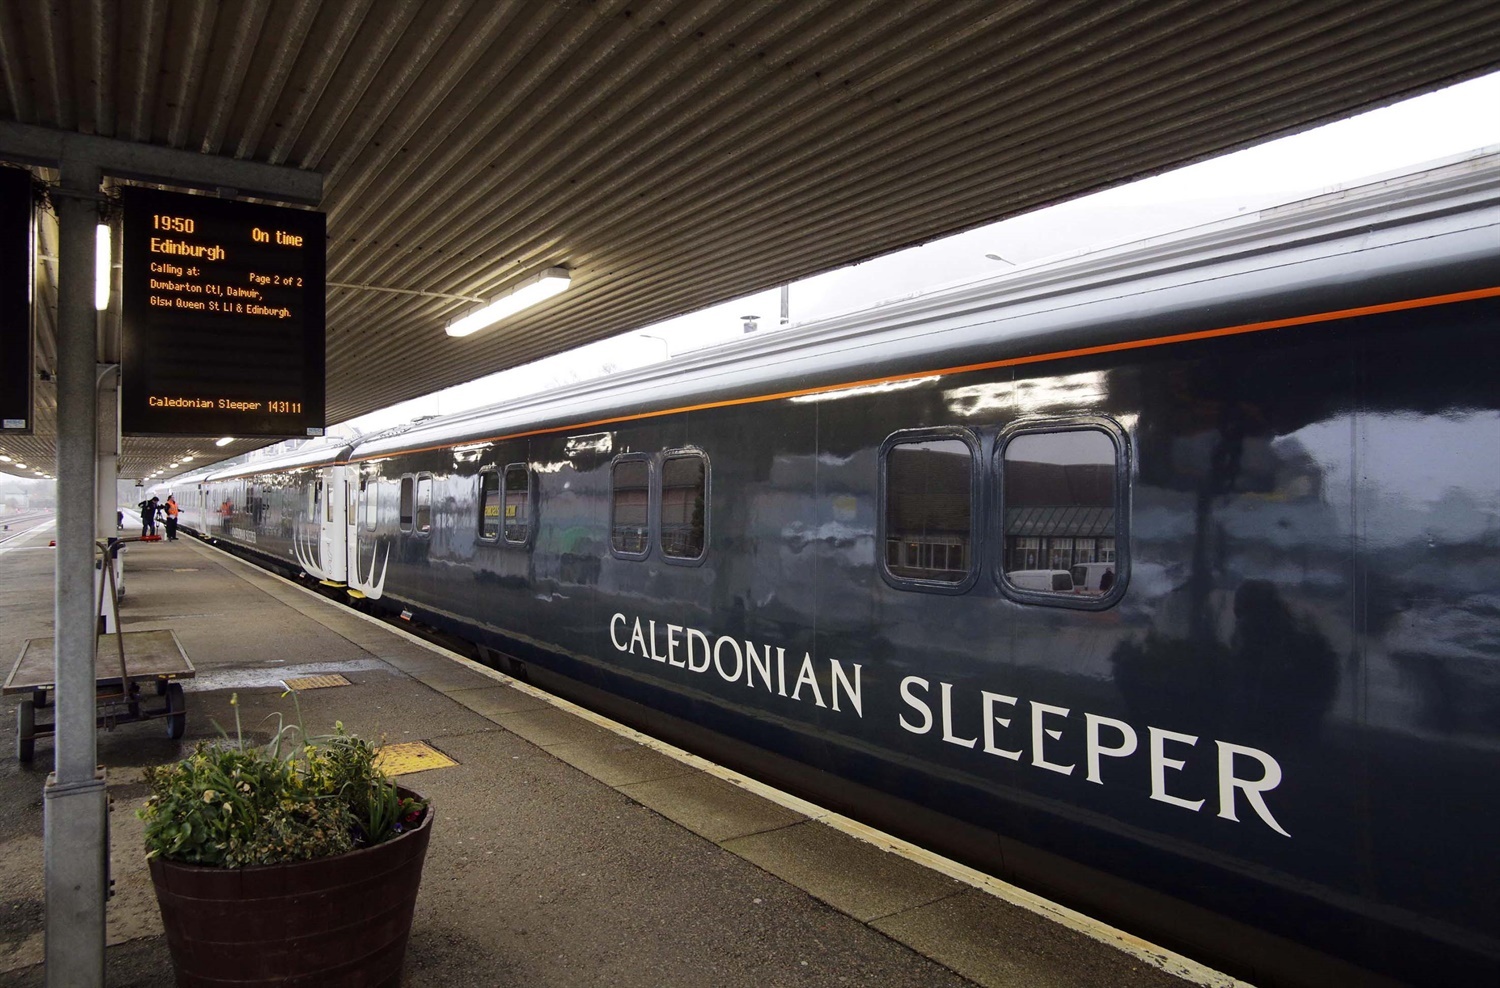 RMT accused of ‘completely inaccurate’ Caledonian Sleeper claims after disruption